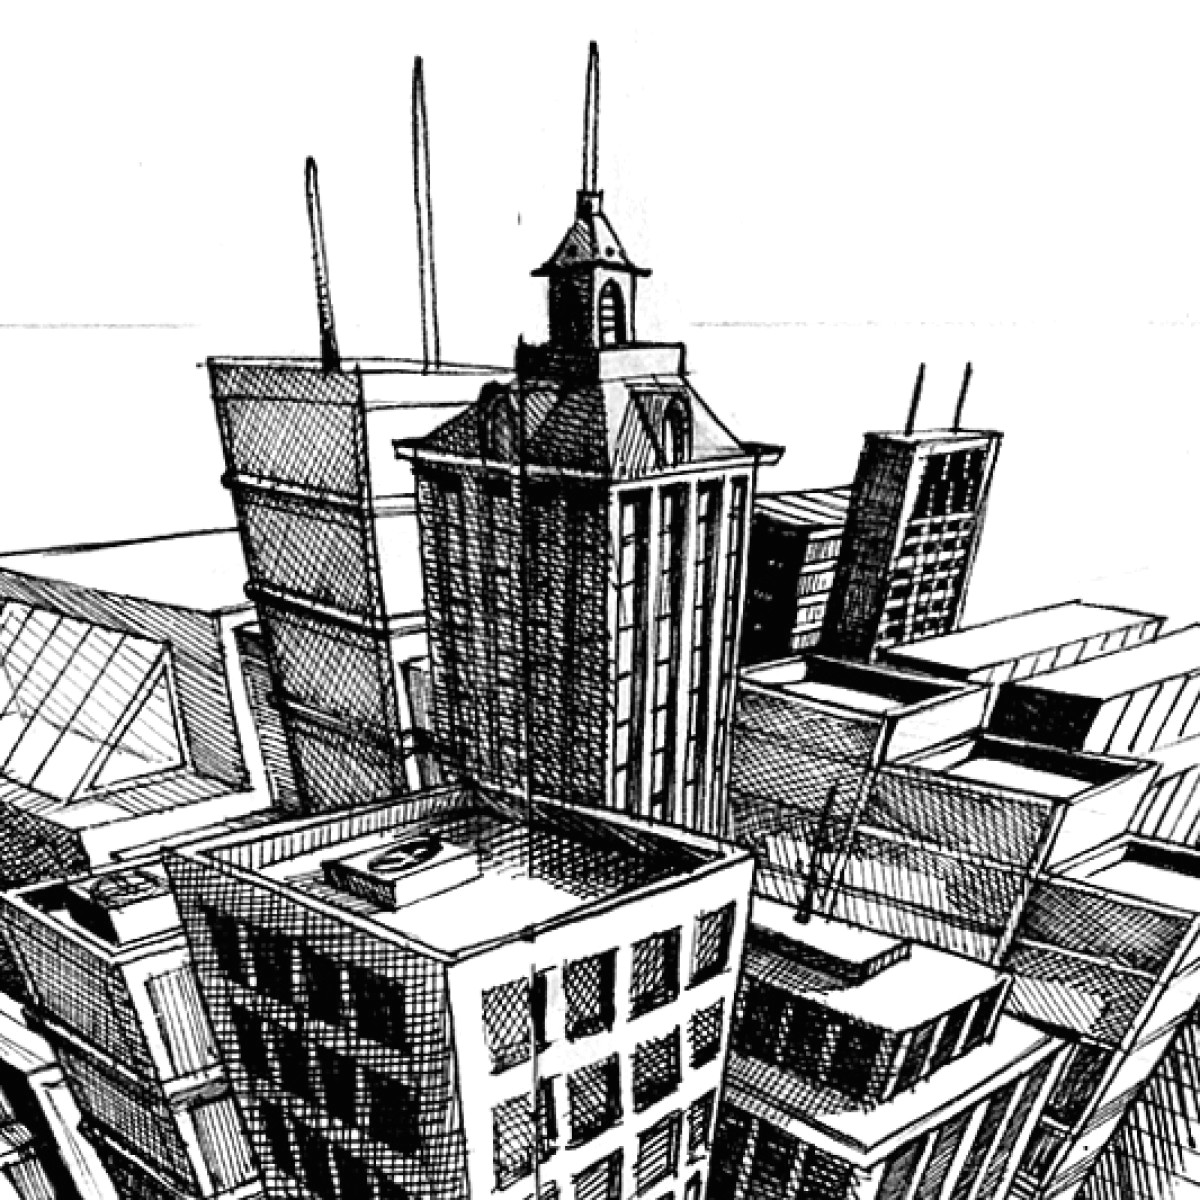 3 Drawing Views A Step by Step Tutorial On the Basics Of Three Point Perspective